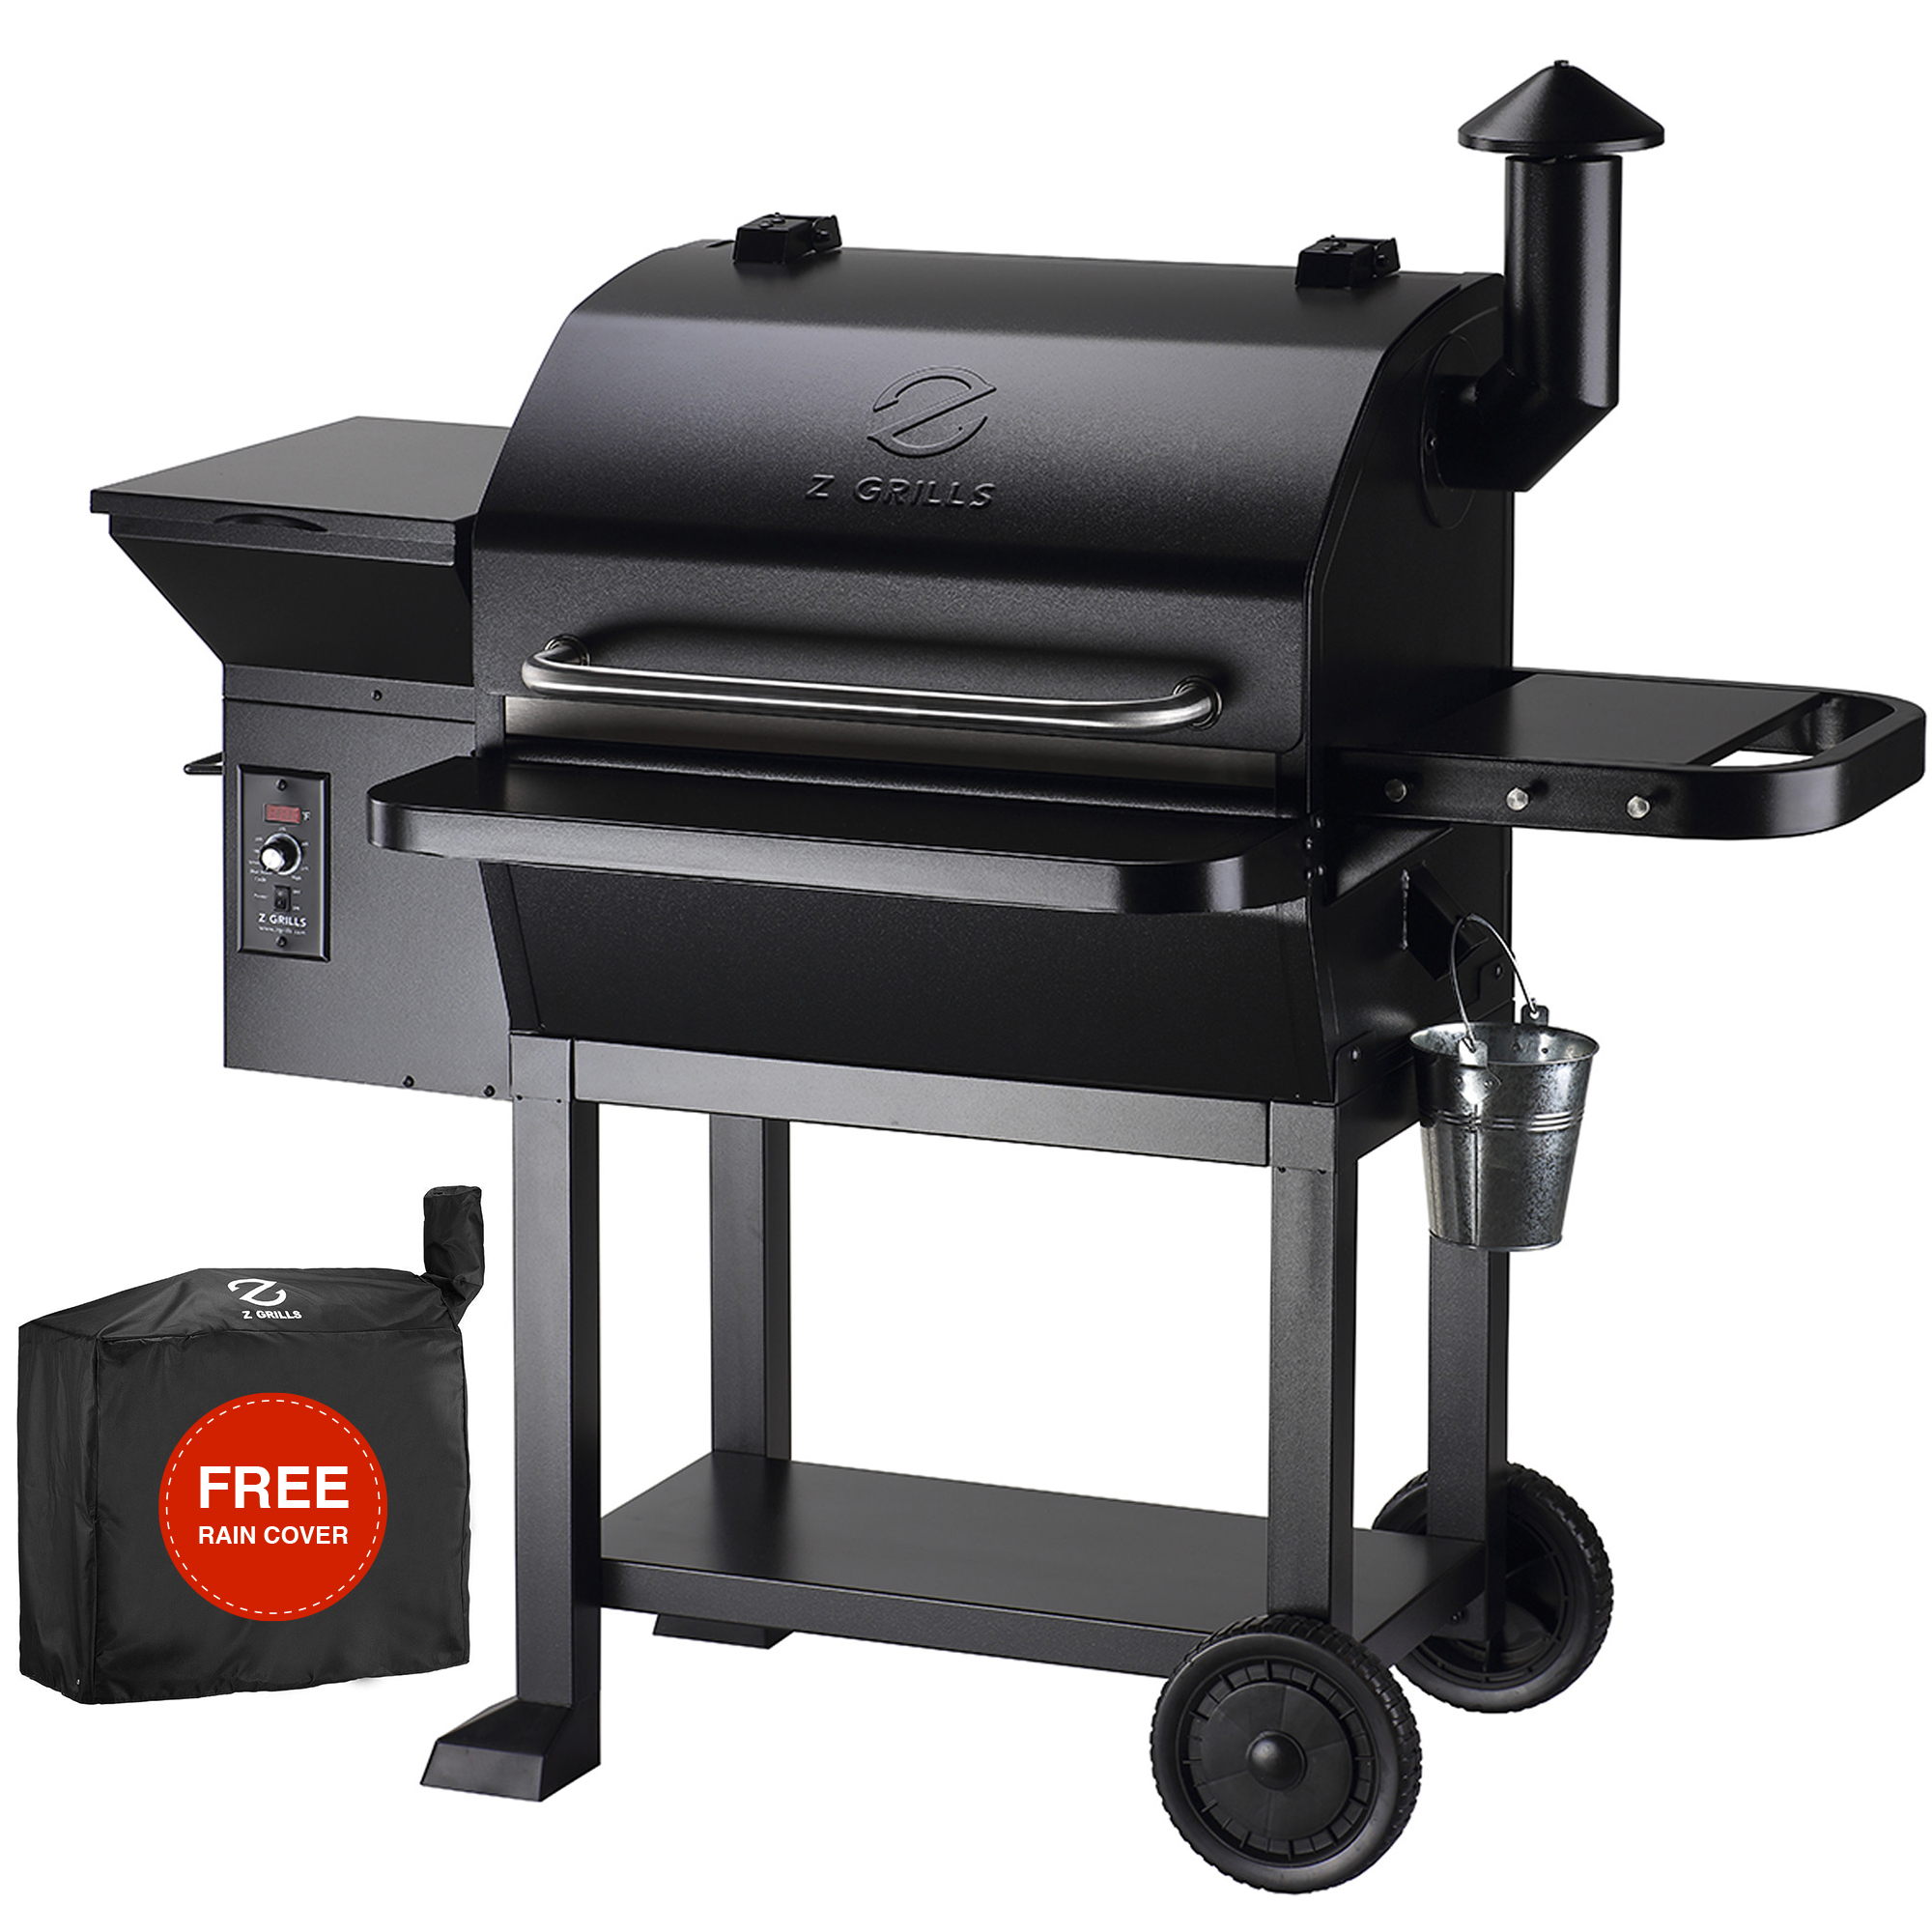 Z GRILLS ZPG-10002B 1060 sq. in. Wood Pellet Grill and Smoker 8-in-1 BBQ Black - image 1 of 12